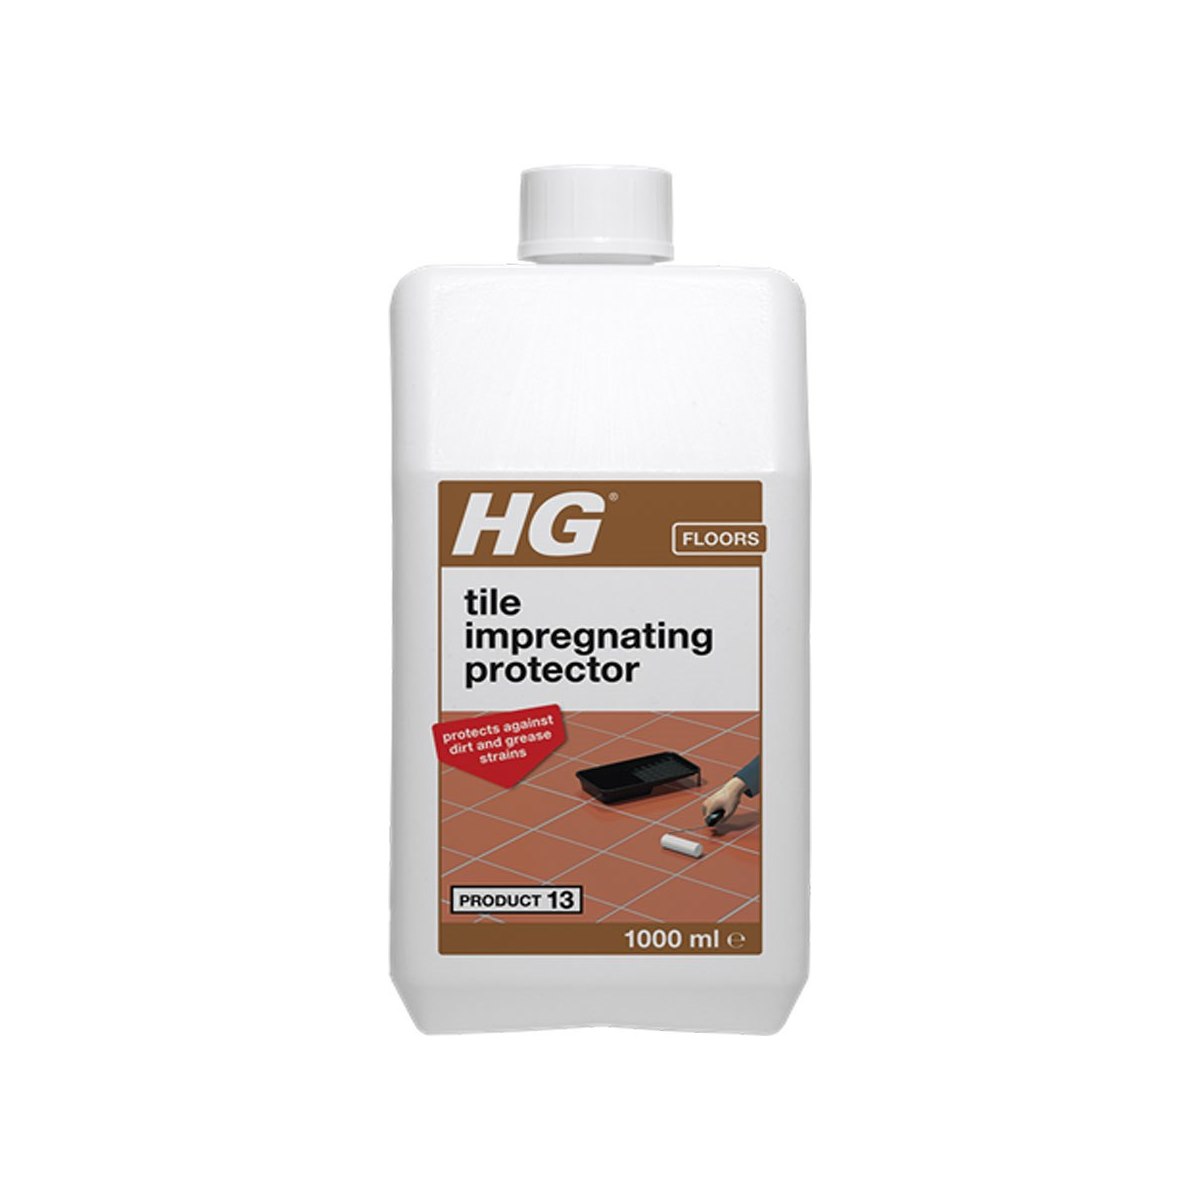 HG Tile Impregnating Protector 1 Litre Product 13